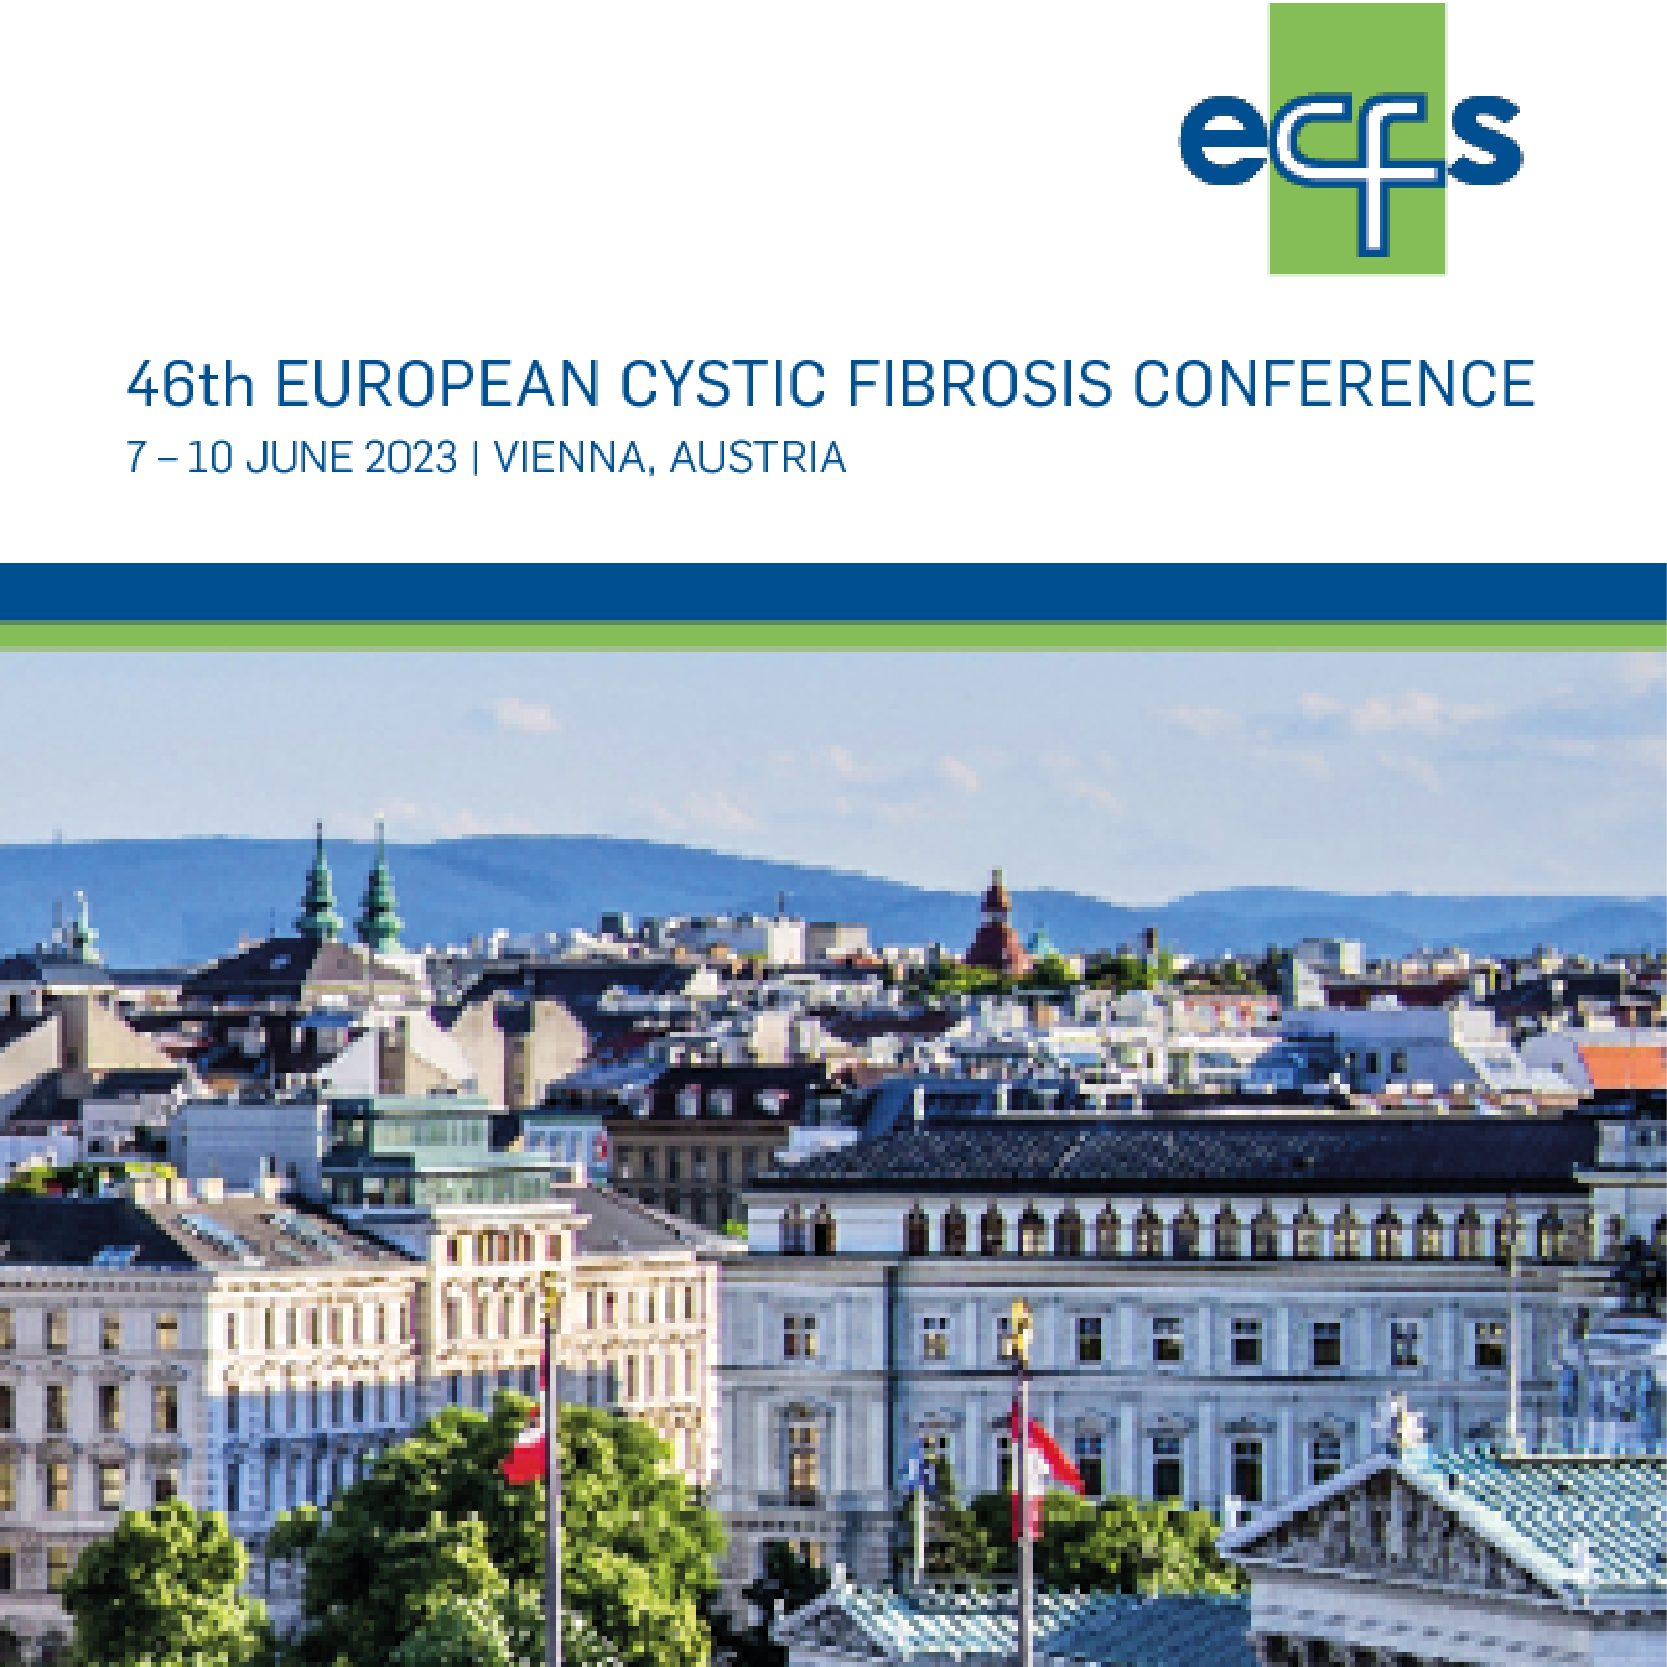 46TH EUROPEAN CYSTIC FIBROSIS CONFERENCE - ECFS 2023